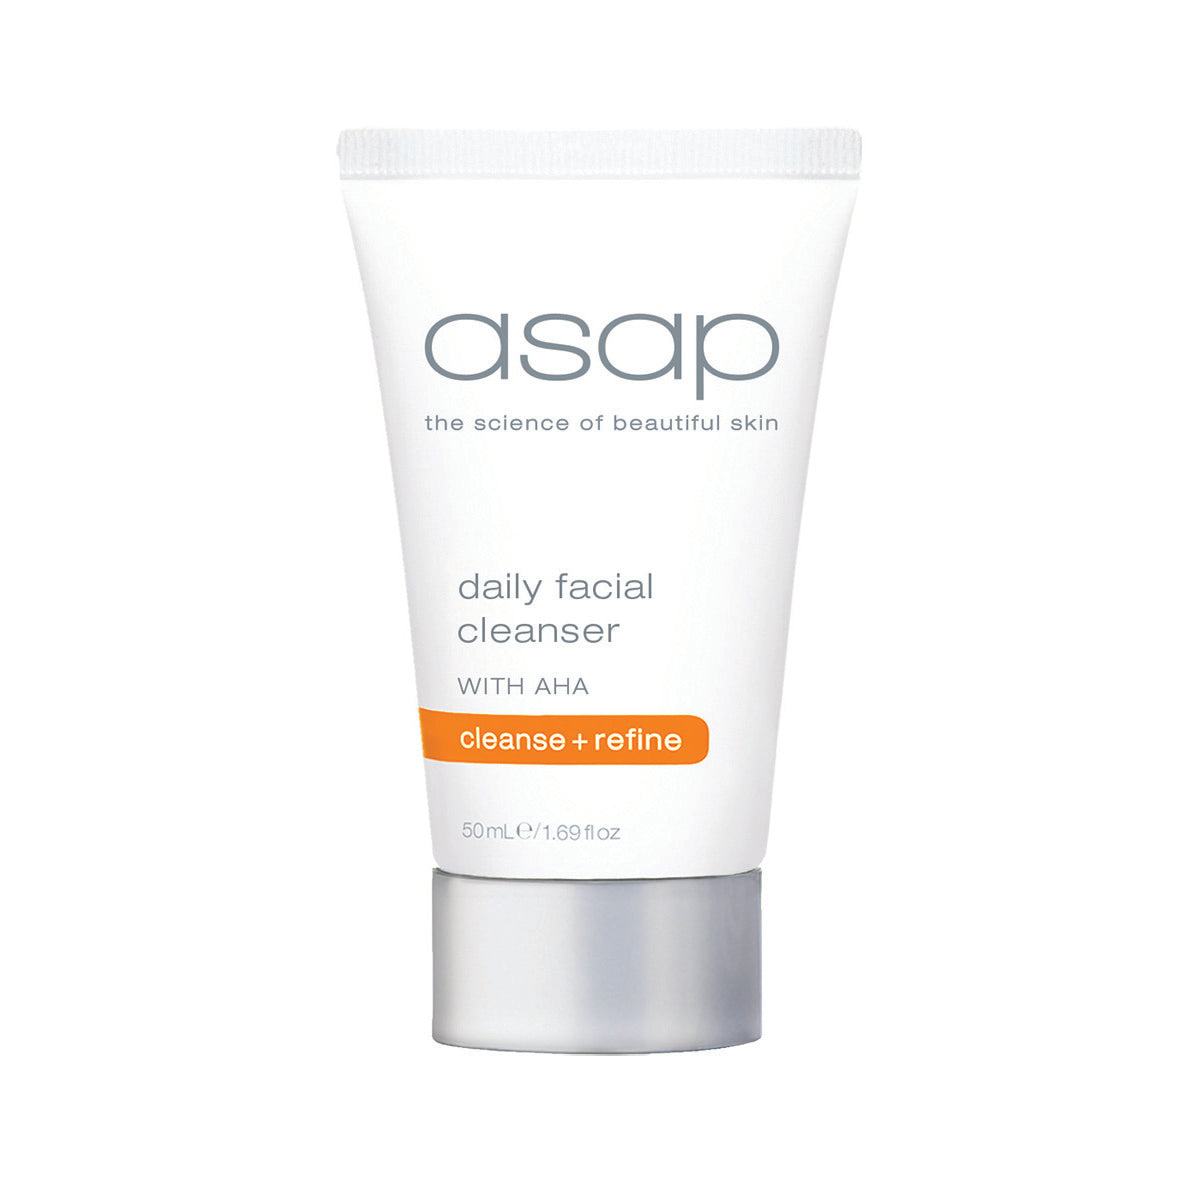 ASAP Daily Facial Cleanser Travel Size